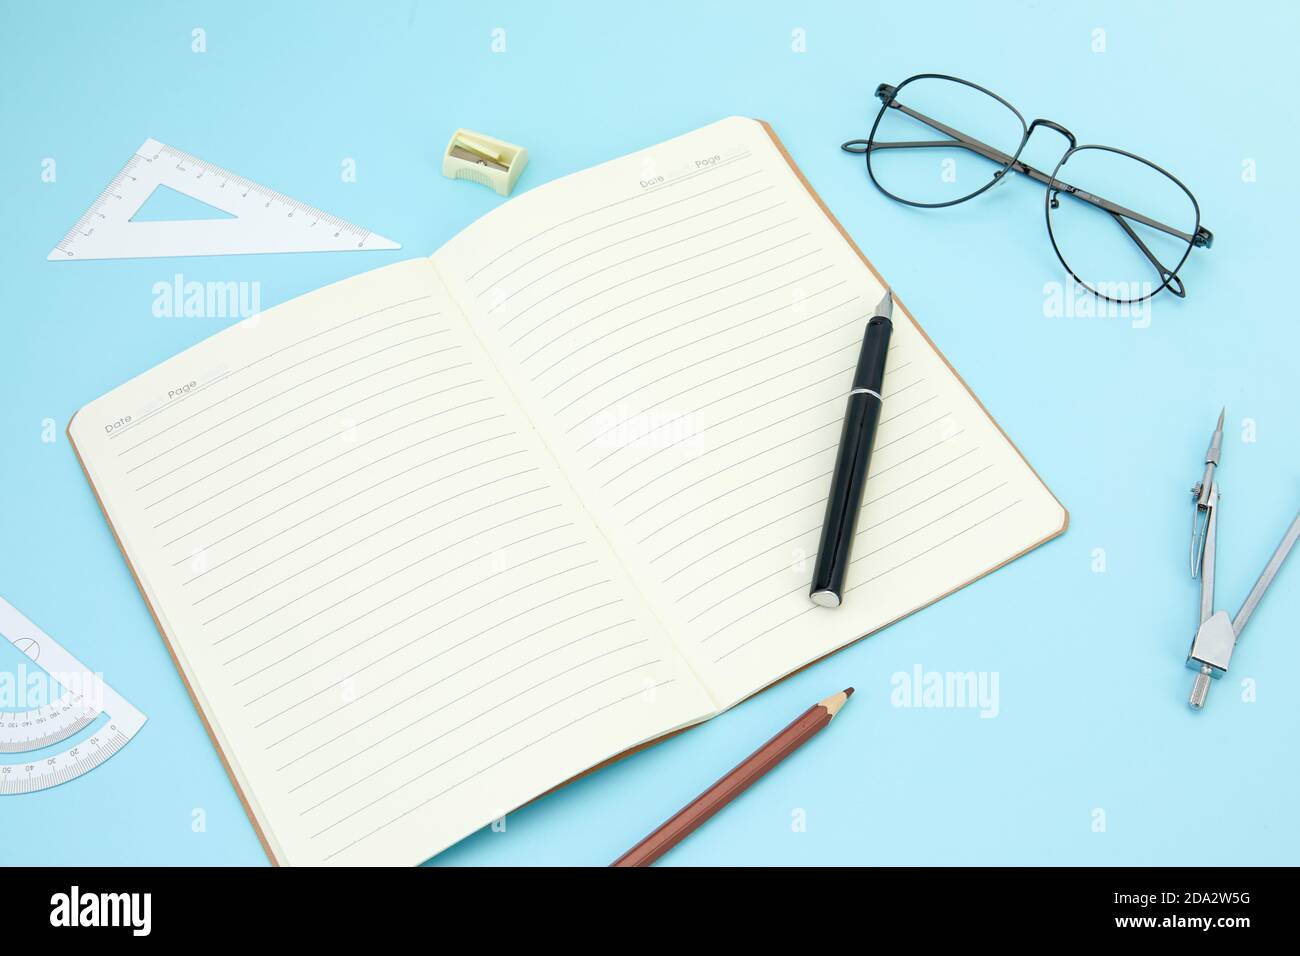 Open notebook, ballpen, pencil, sharpener, rulers, and eyeglasses isolated on a blue surface Stock Photo